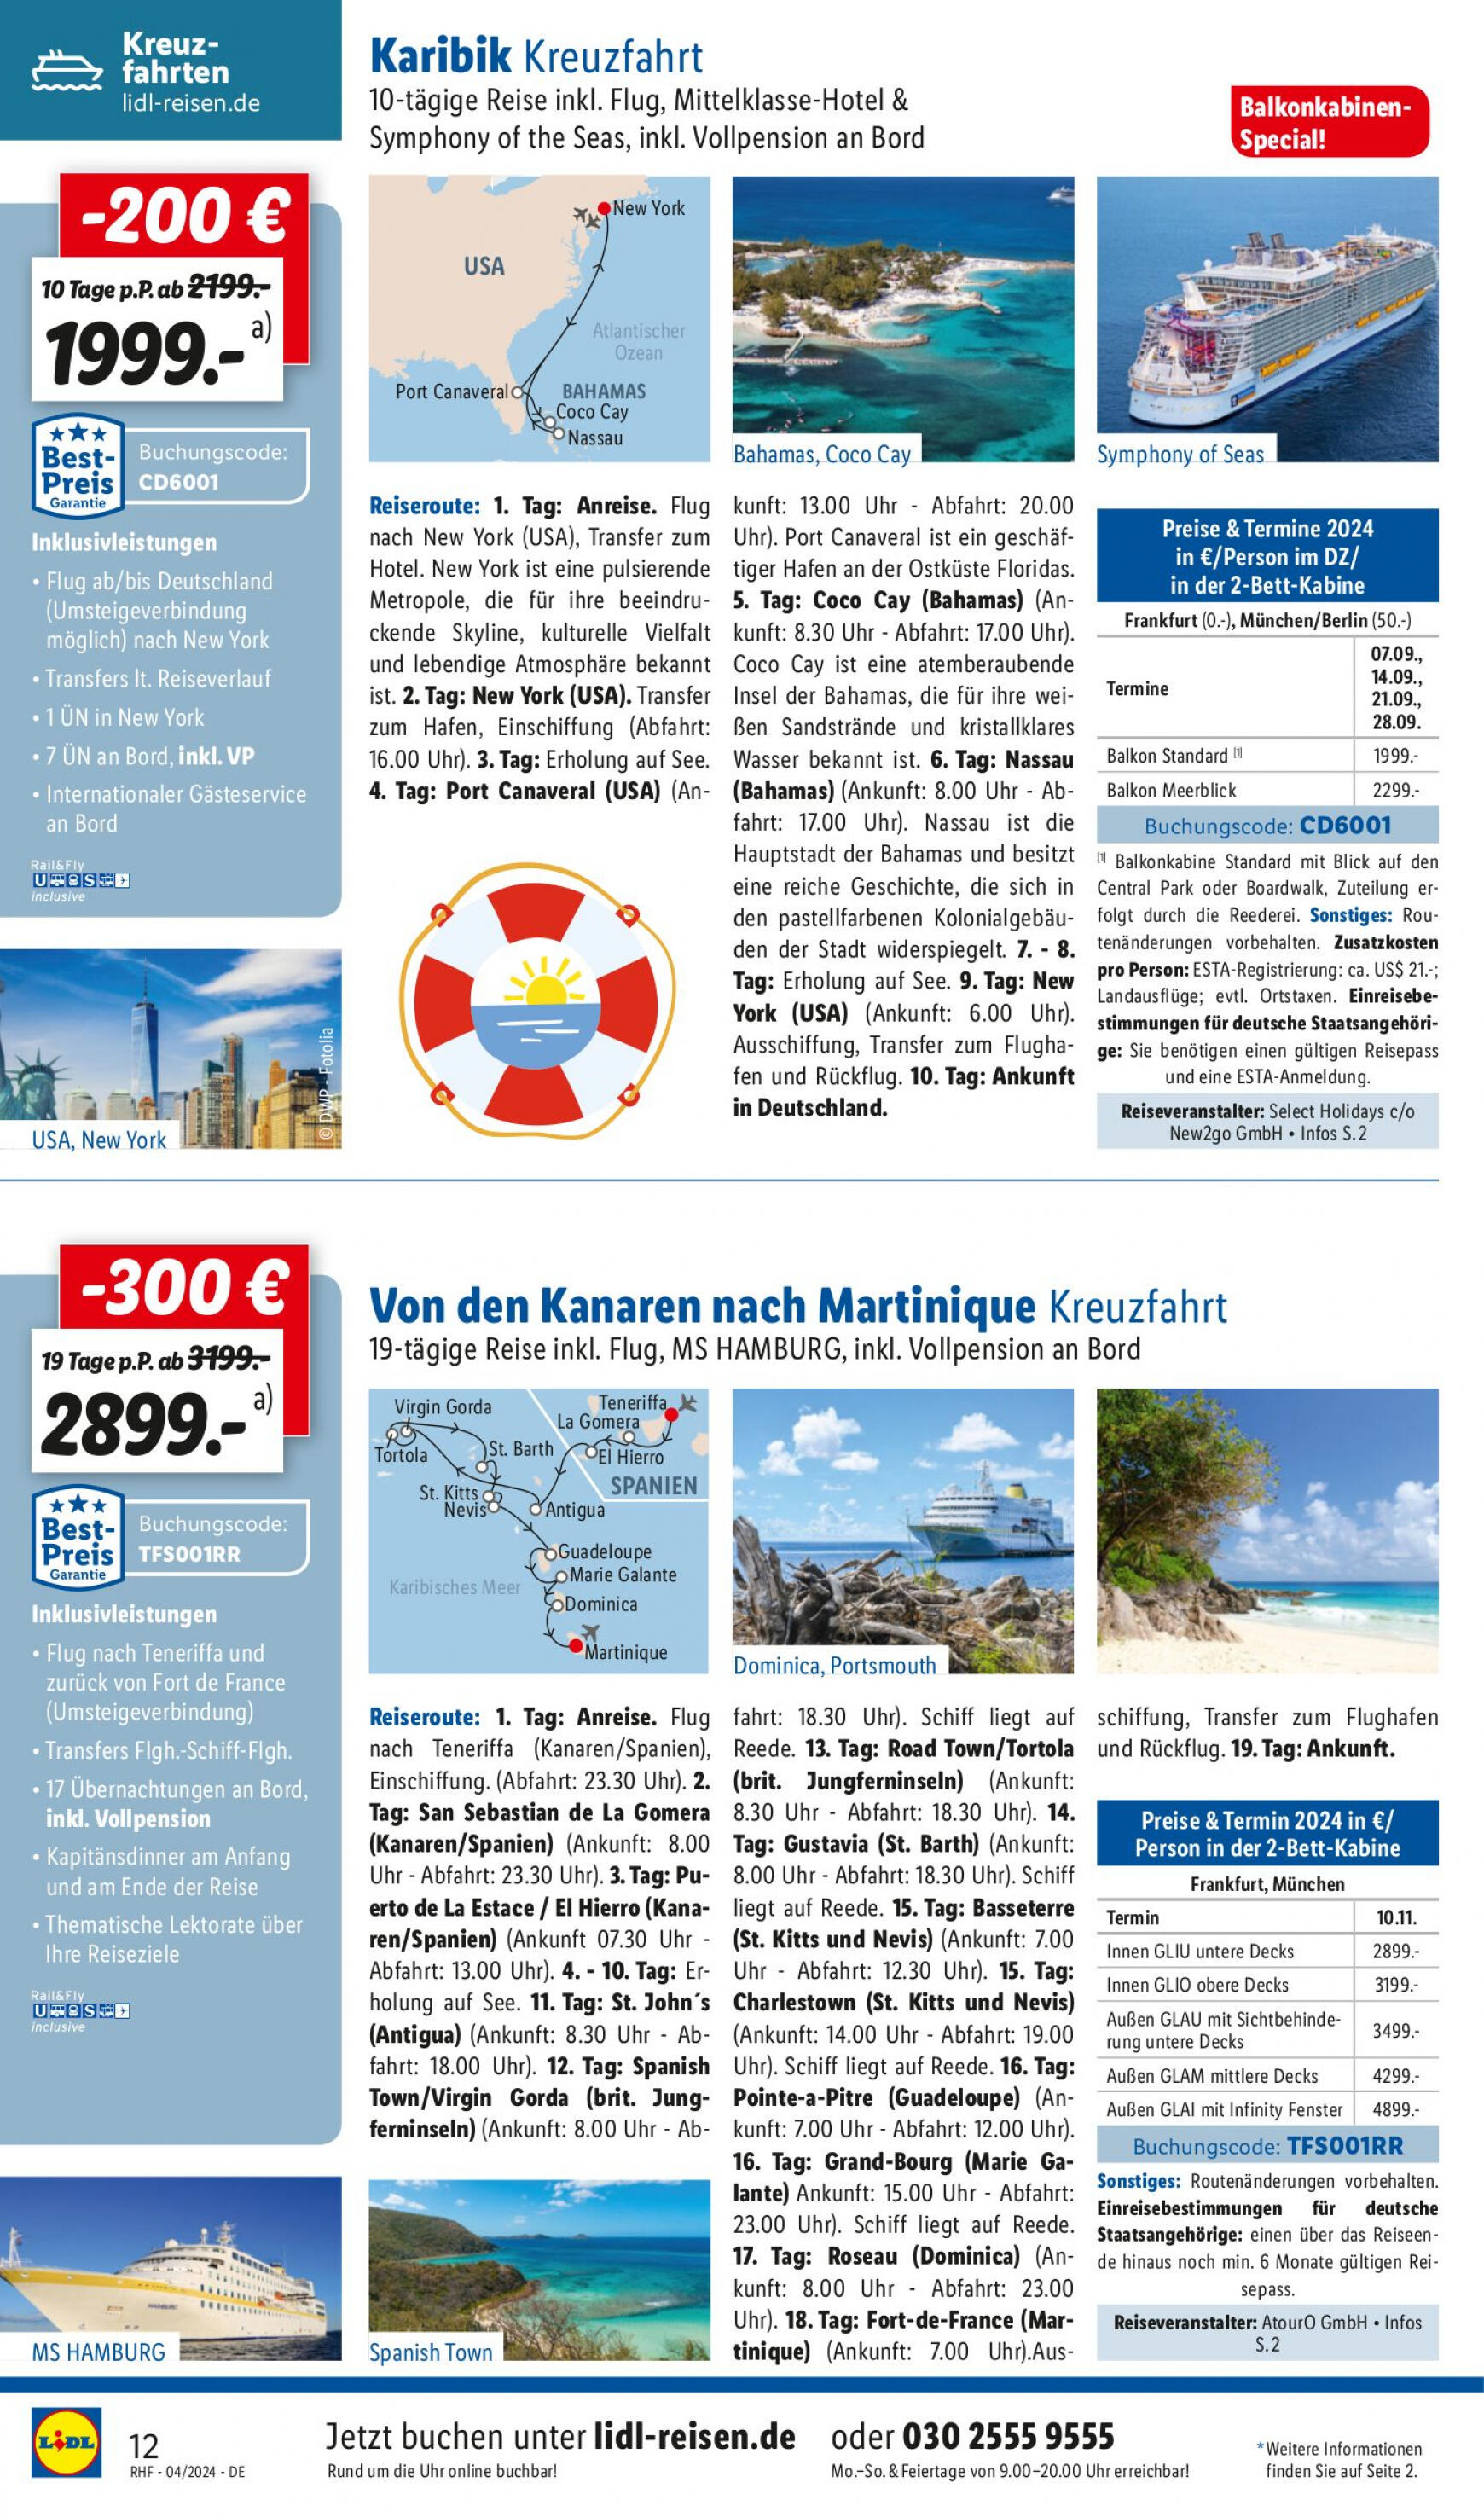 lidl - Flyer Lidl - April Reise-Highlights aktuell 27.03. - 30.04. - page: 12